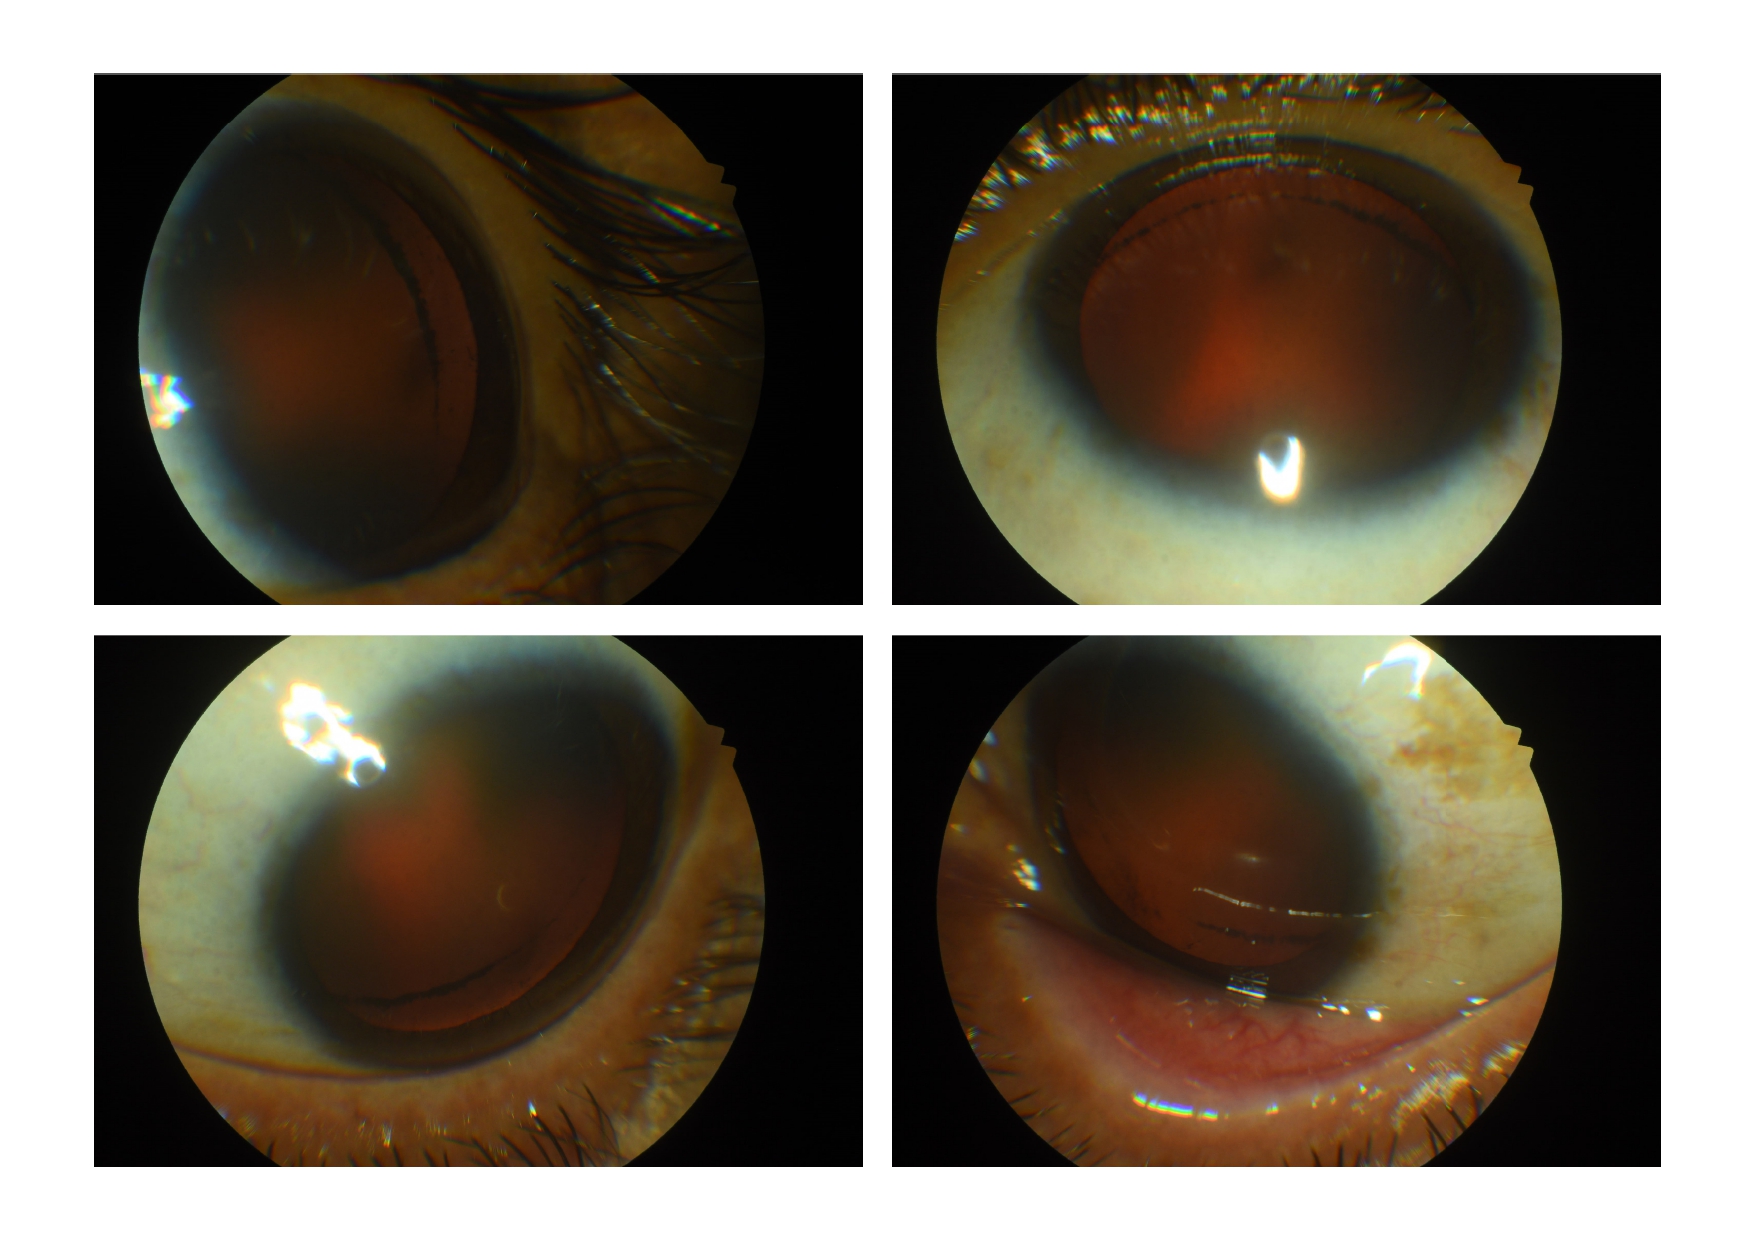 Zentmayer line (Schie line) in an eye with pigment dispersion syndrome